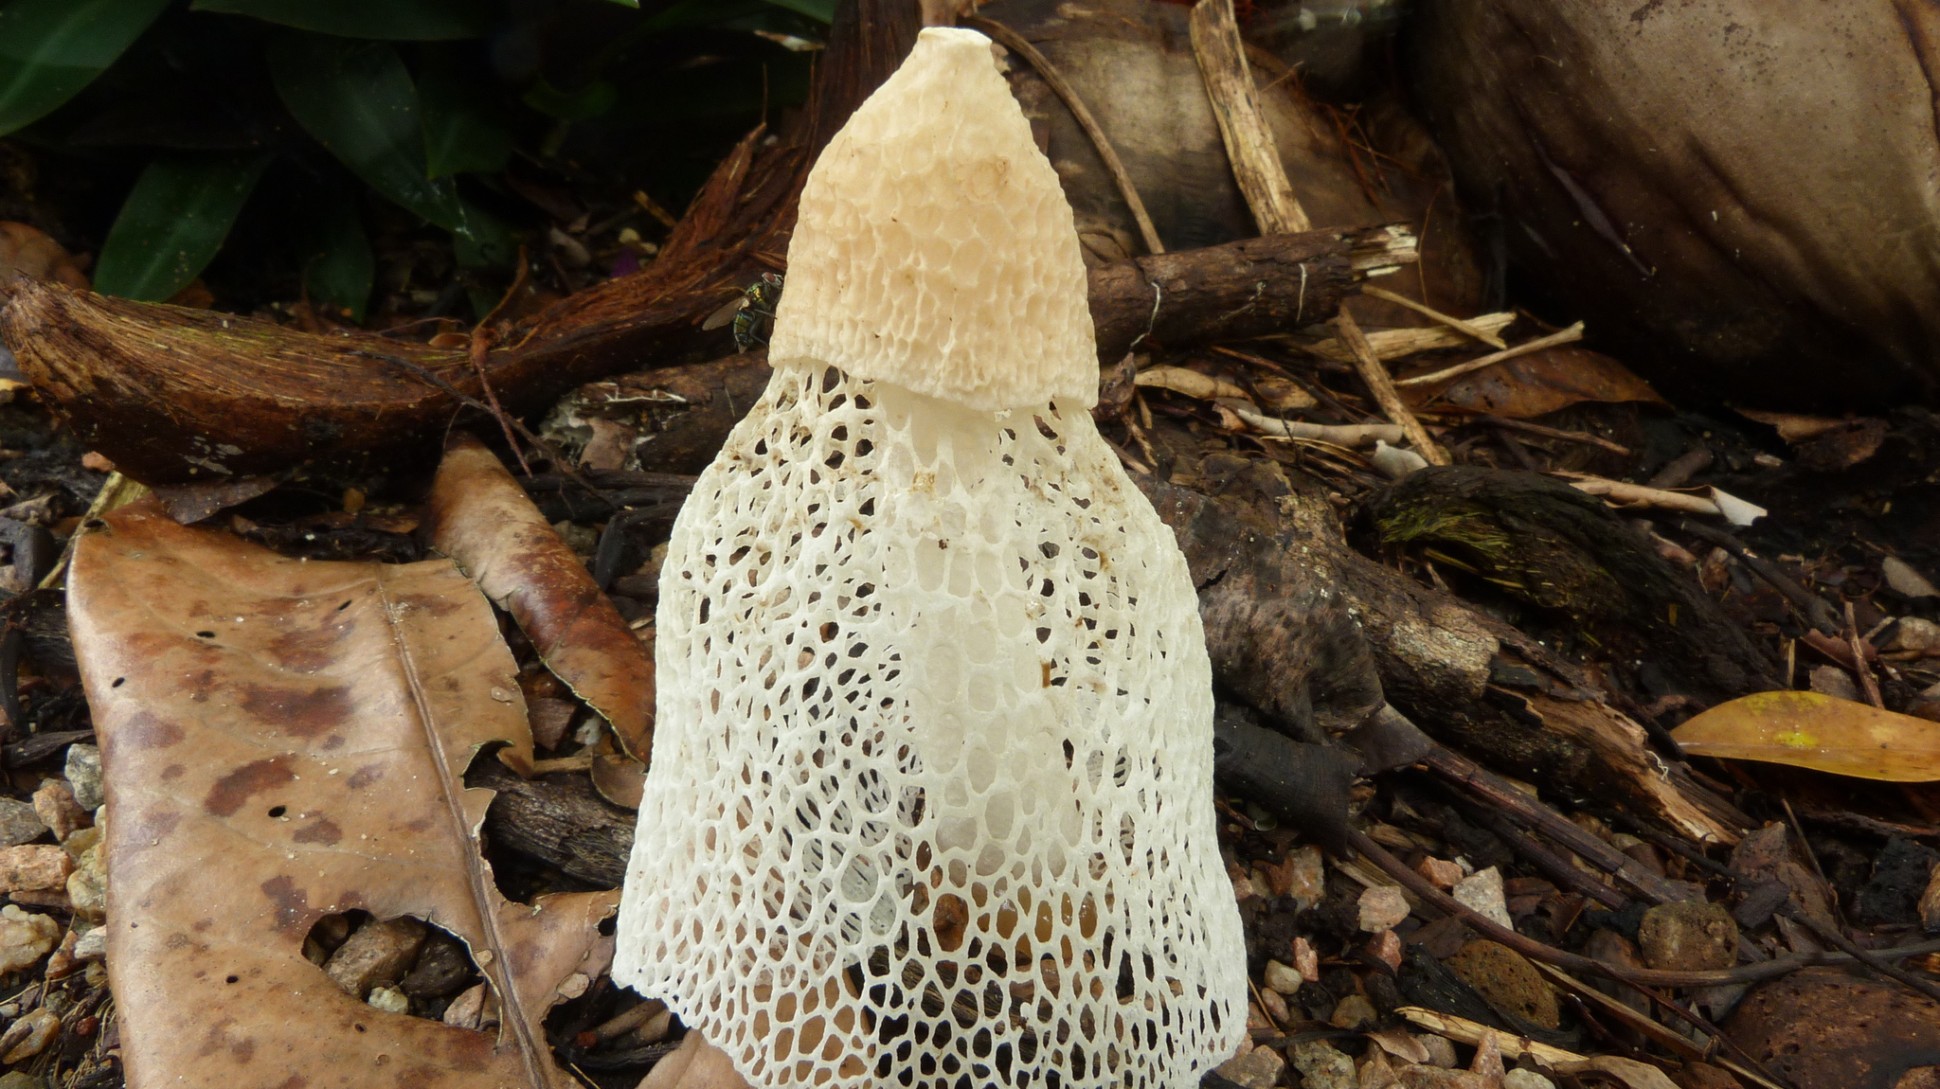 A tall white fungus with a net-like structure hanging from its top